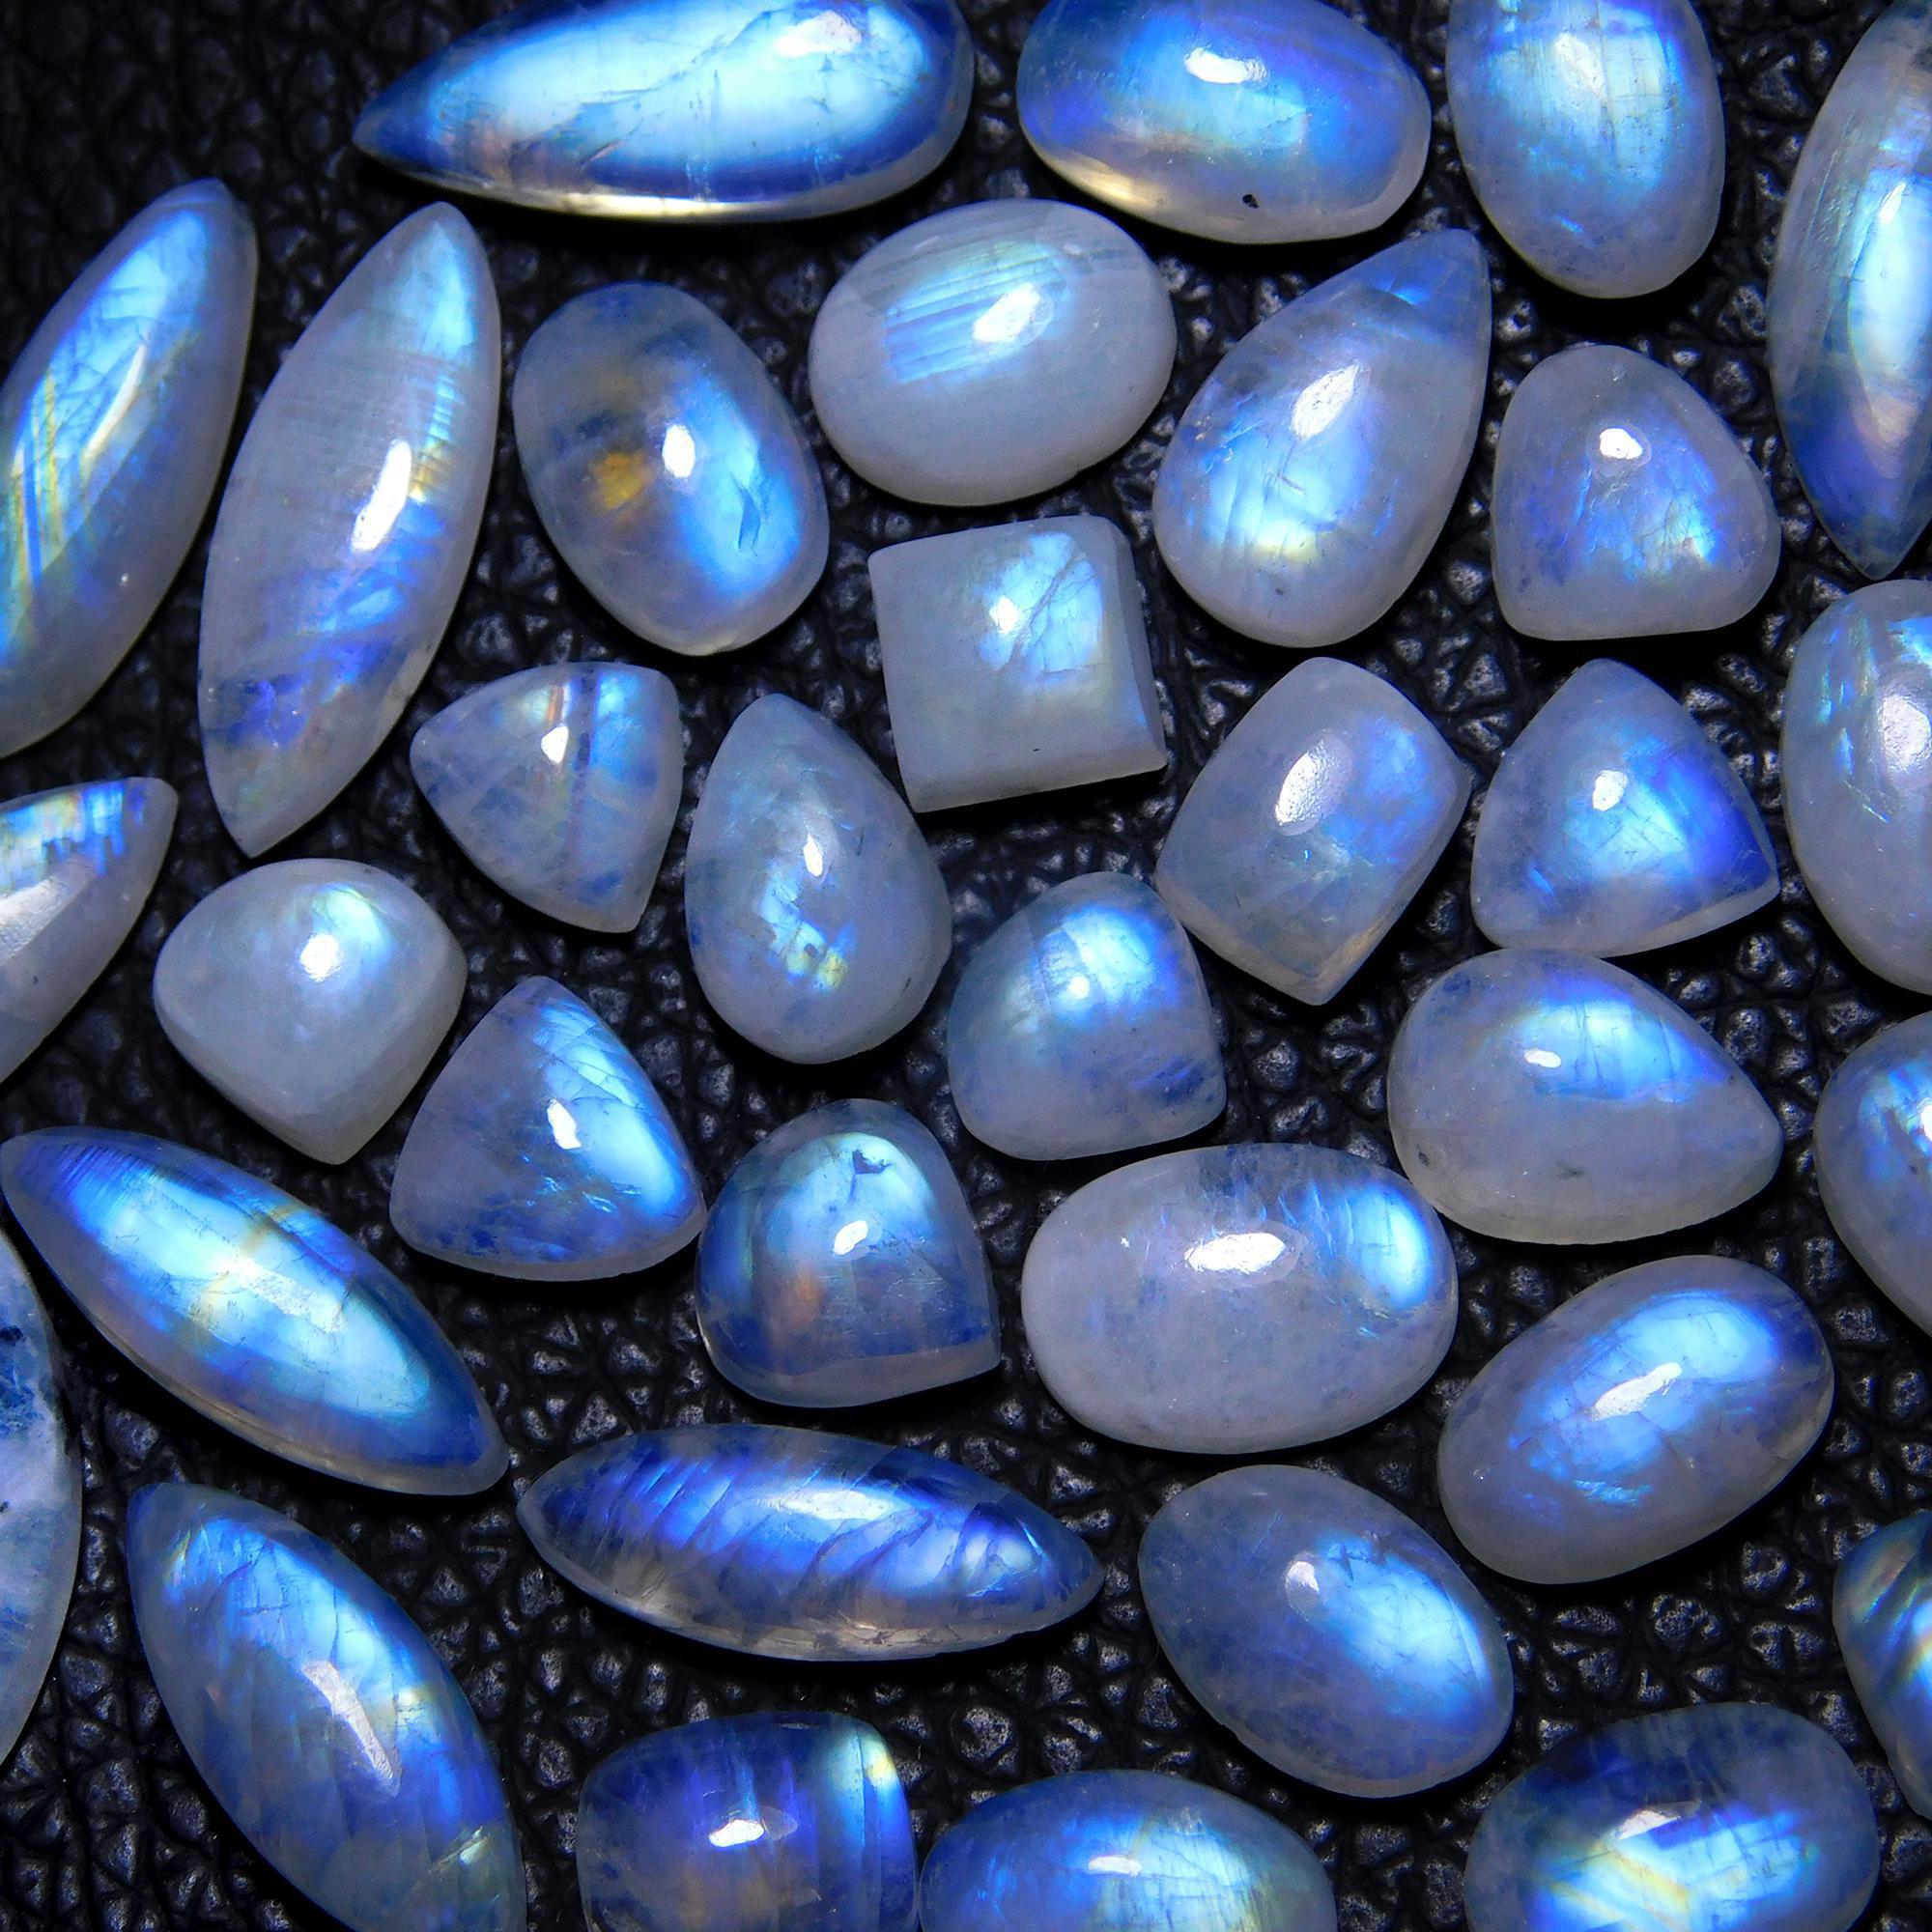 34Pcs 97Cts Natural Rainbow Moonstone Cabochon Blue Fire Loose Gemstone Crystal jewelry supplies wholesale lot gift for her Black Friday 18X7 7X7mm#9413